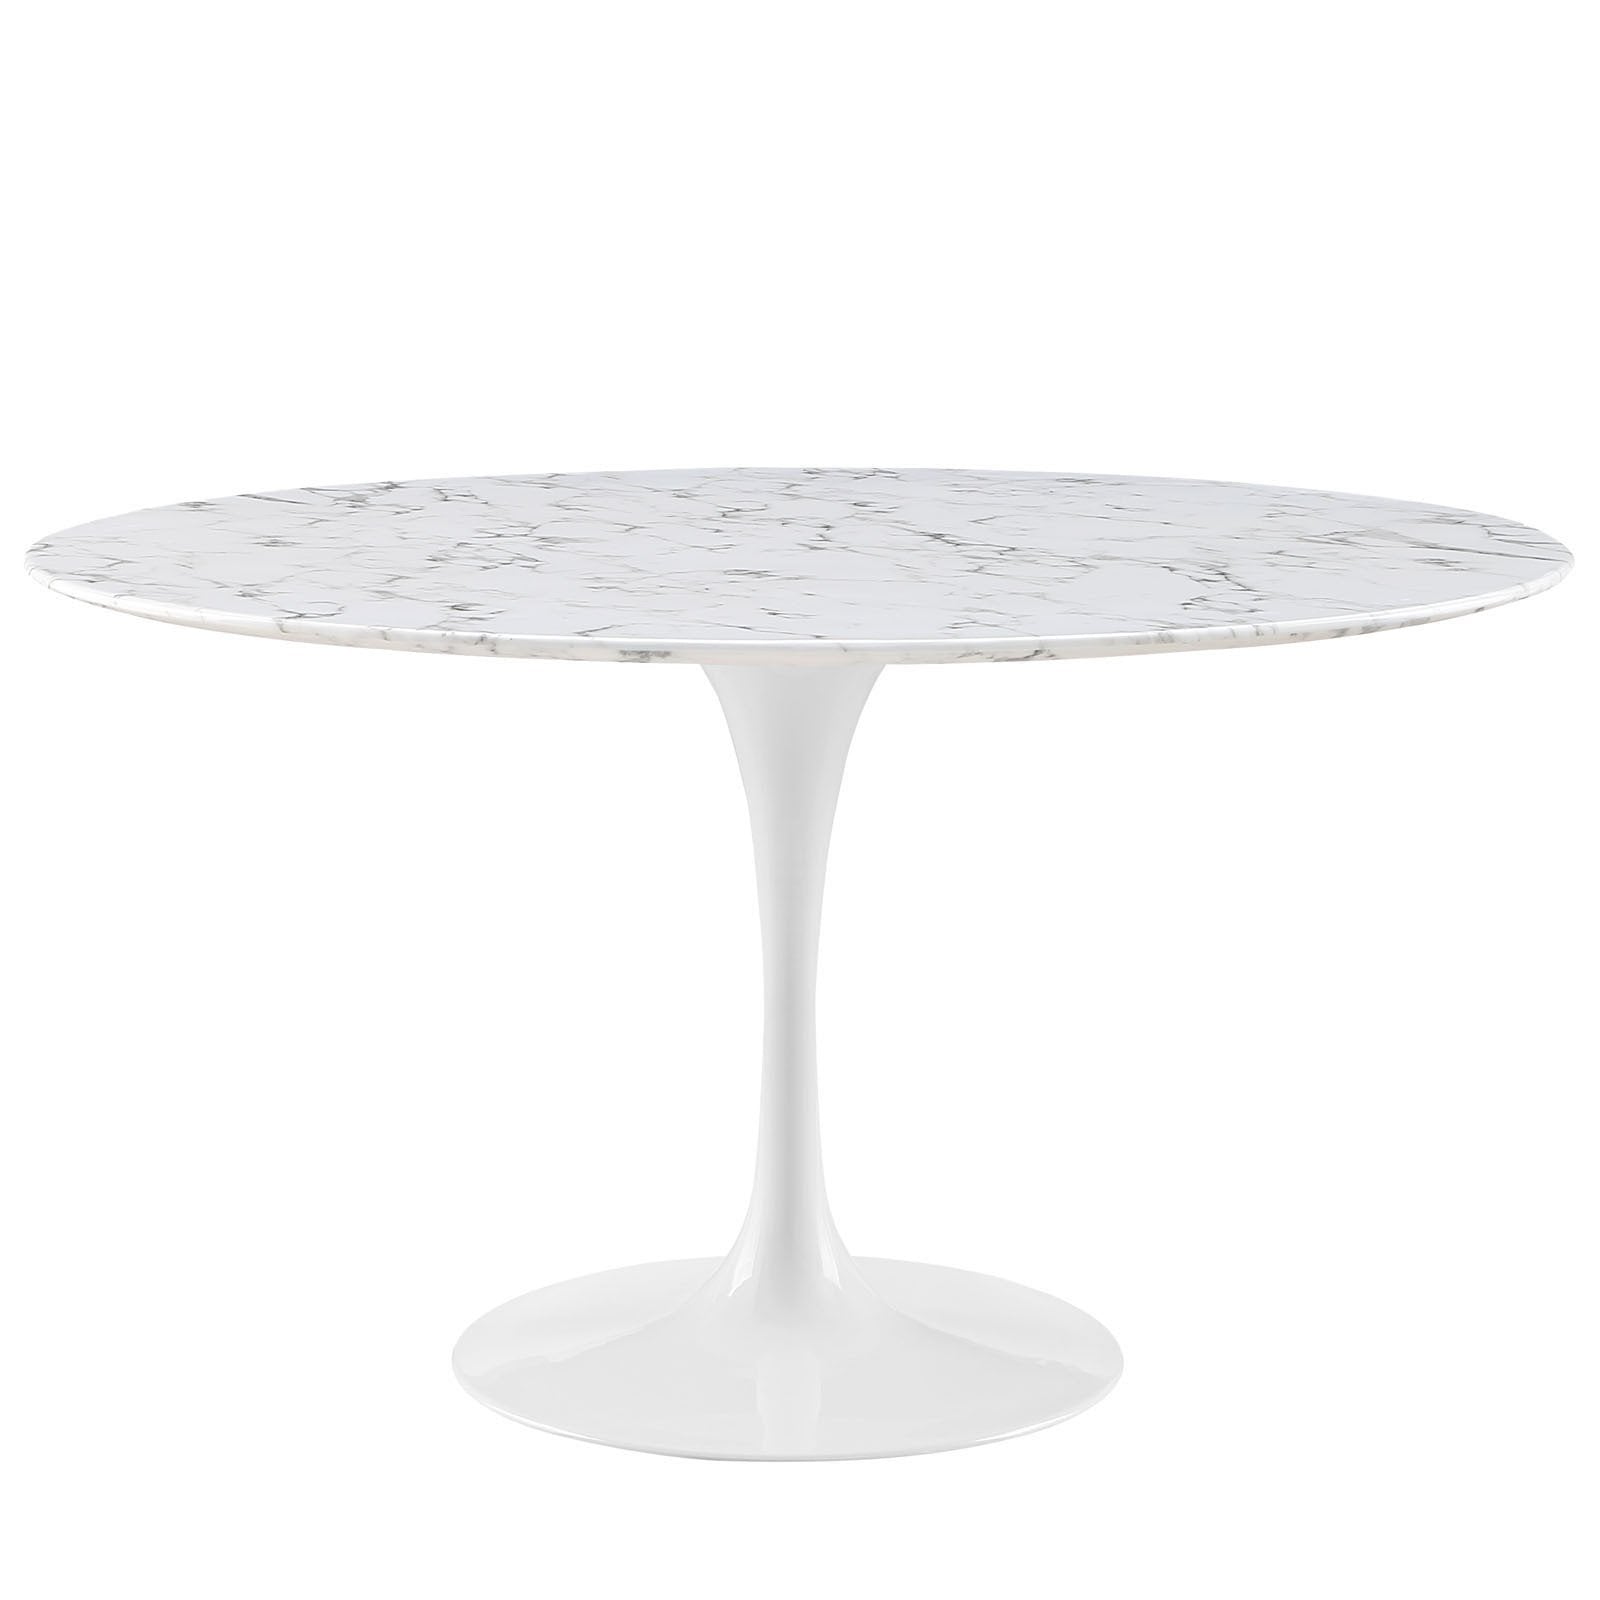 Tulip Style 54" Marble Dining Table - living-essentials